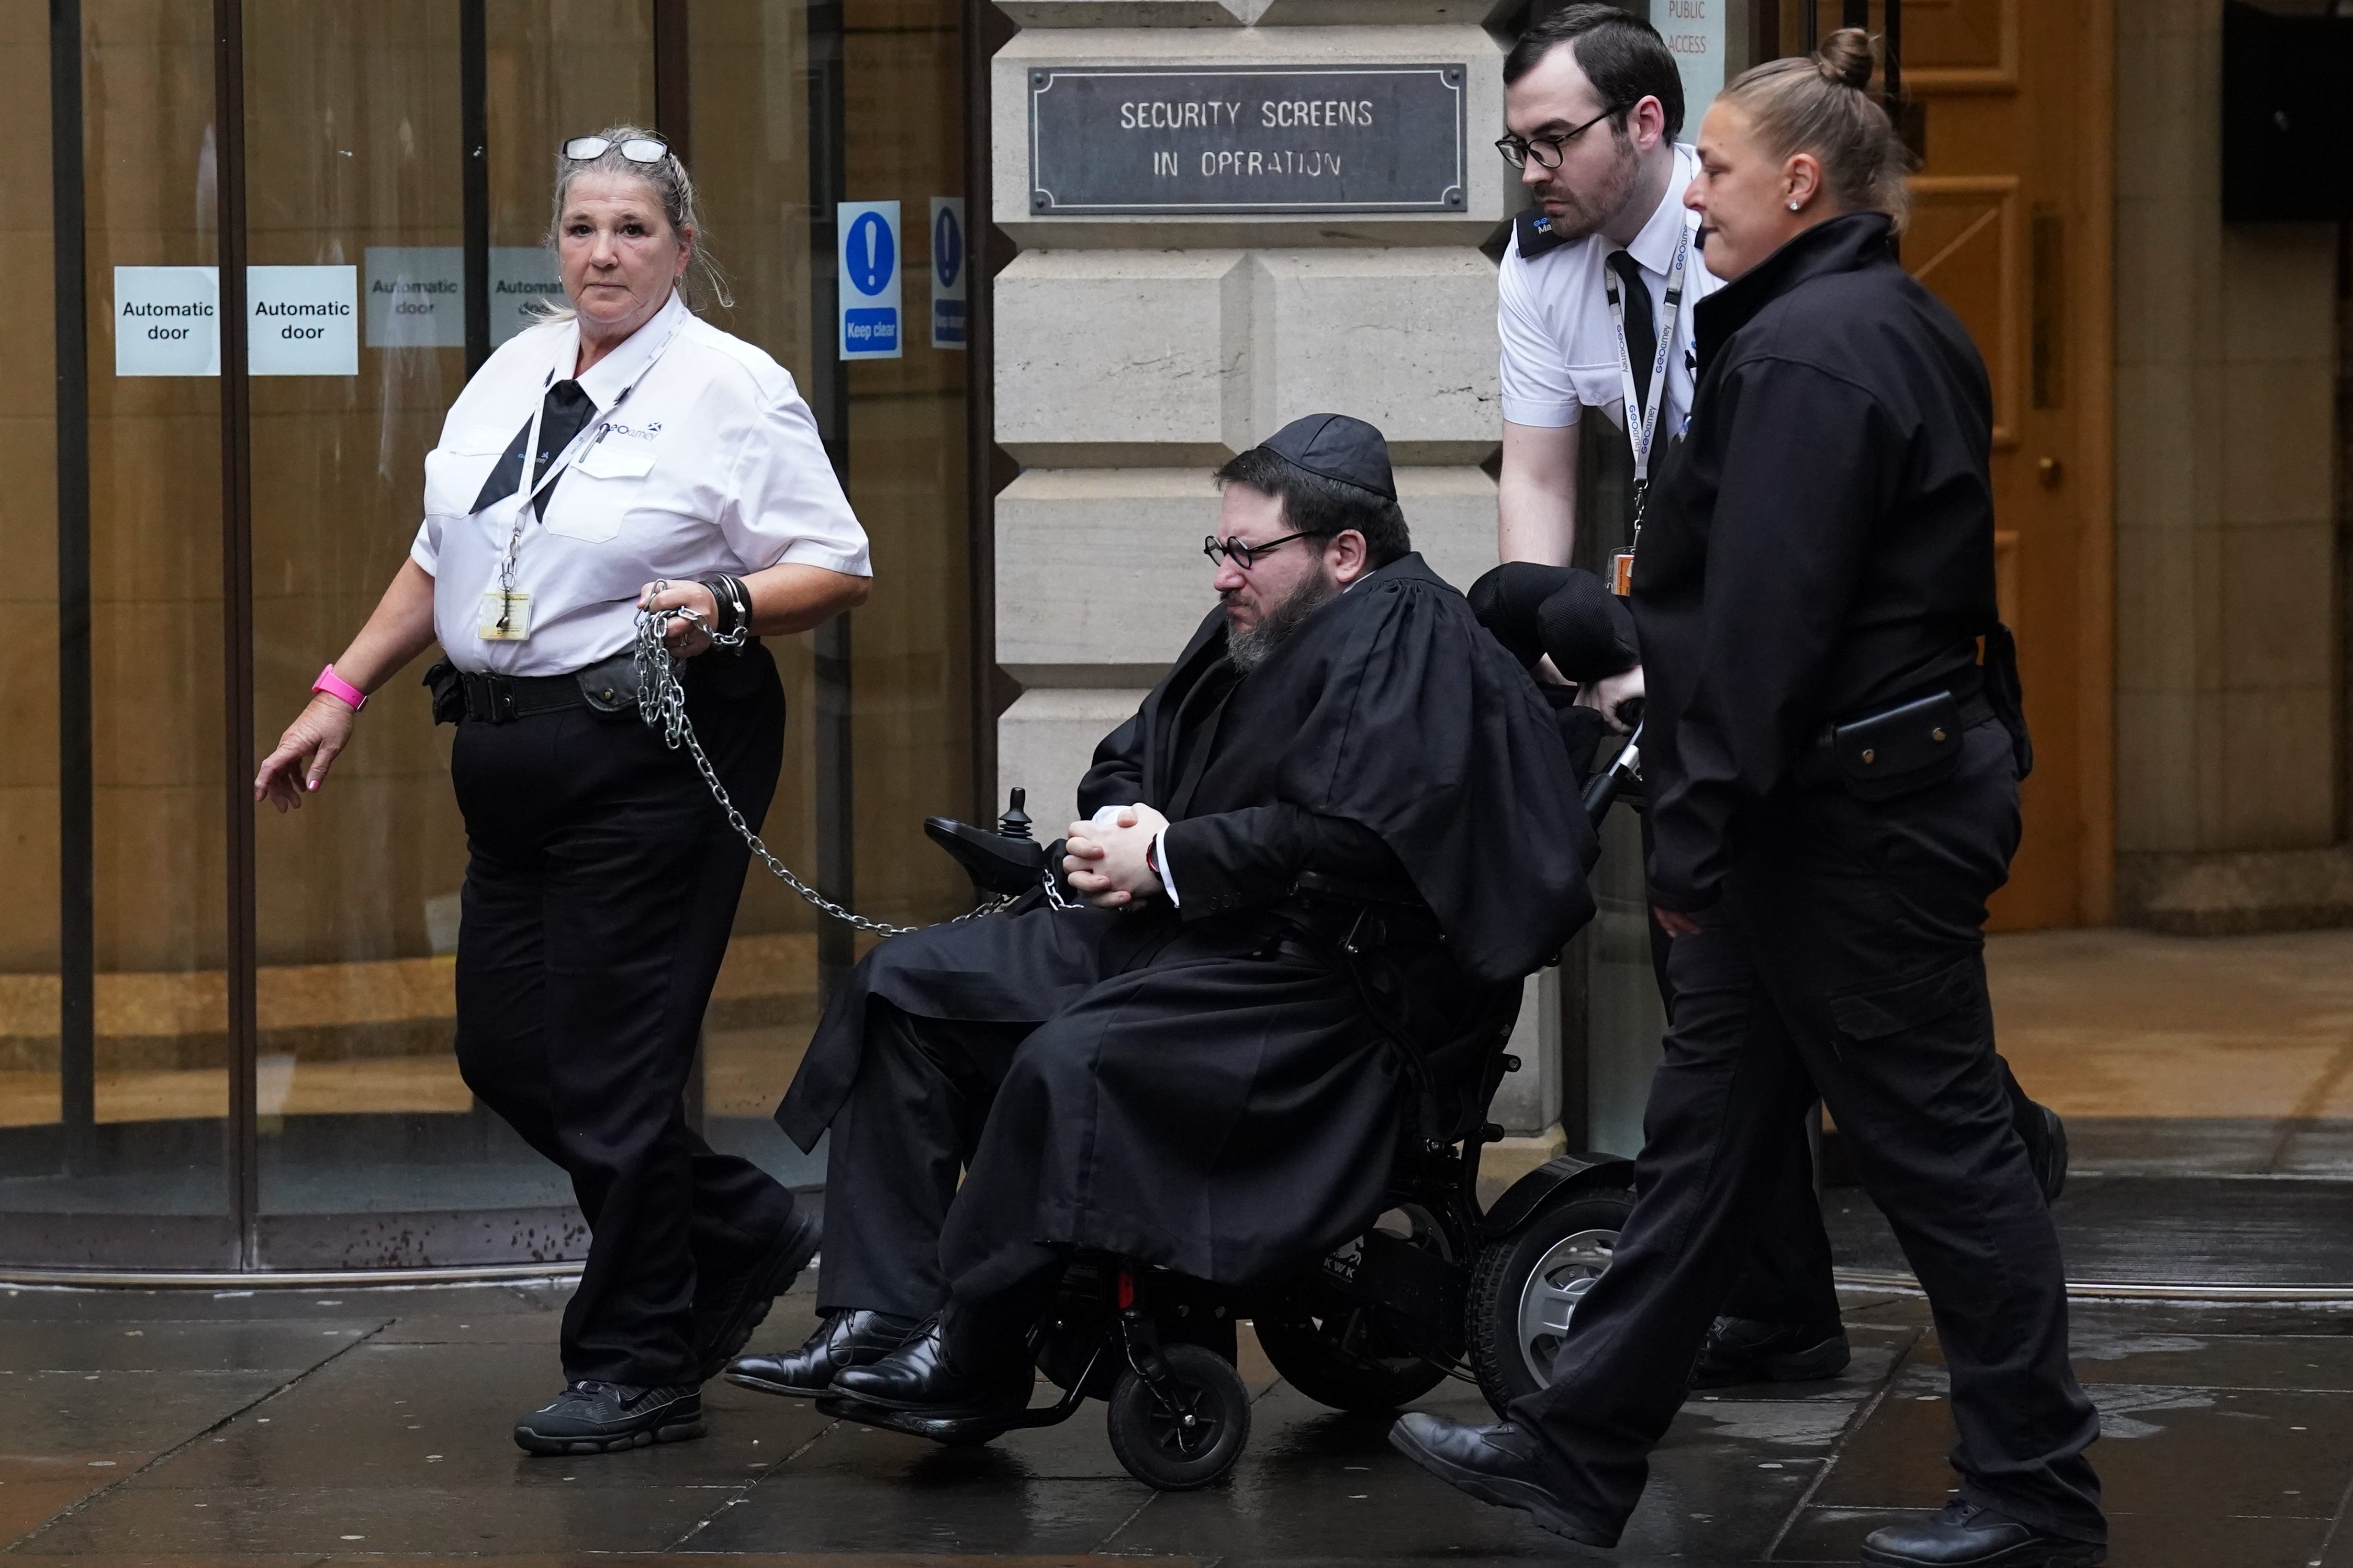 Nicholas Rossi told the court he is unable to raise his arms above his head (Andrew Milligan/PA)